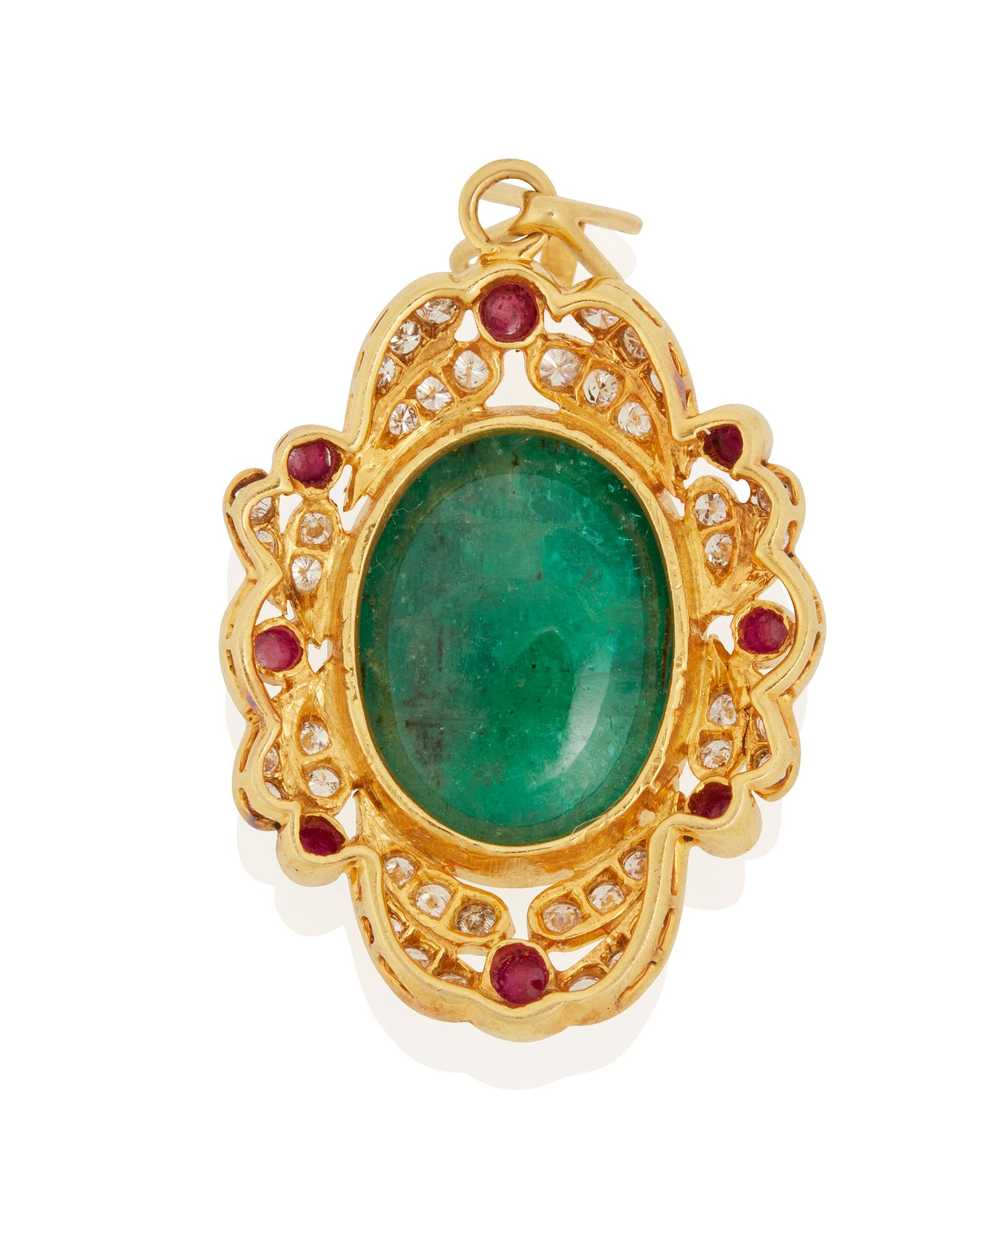 An Emerald, Diamond, Ruby and Gold Pendant - image 2